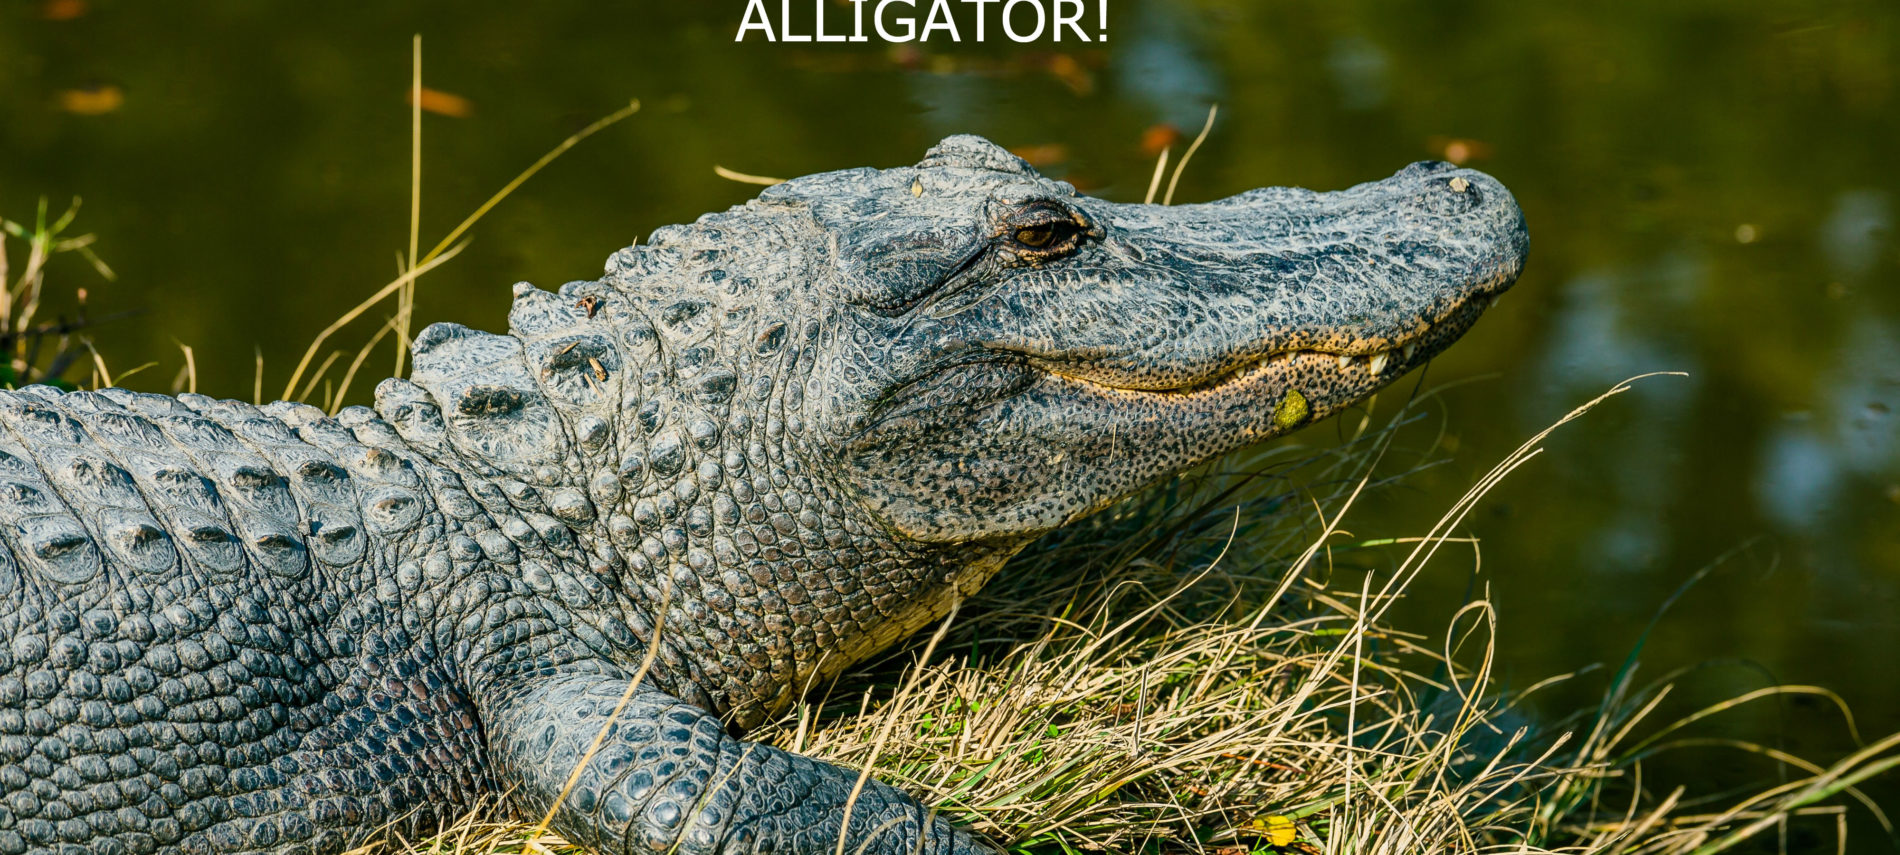 An alligator emerging from a swamp with title: Look What's For Dinner: Alligator!. Photo: Kyaw Tun/Unsplash